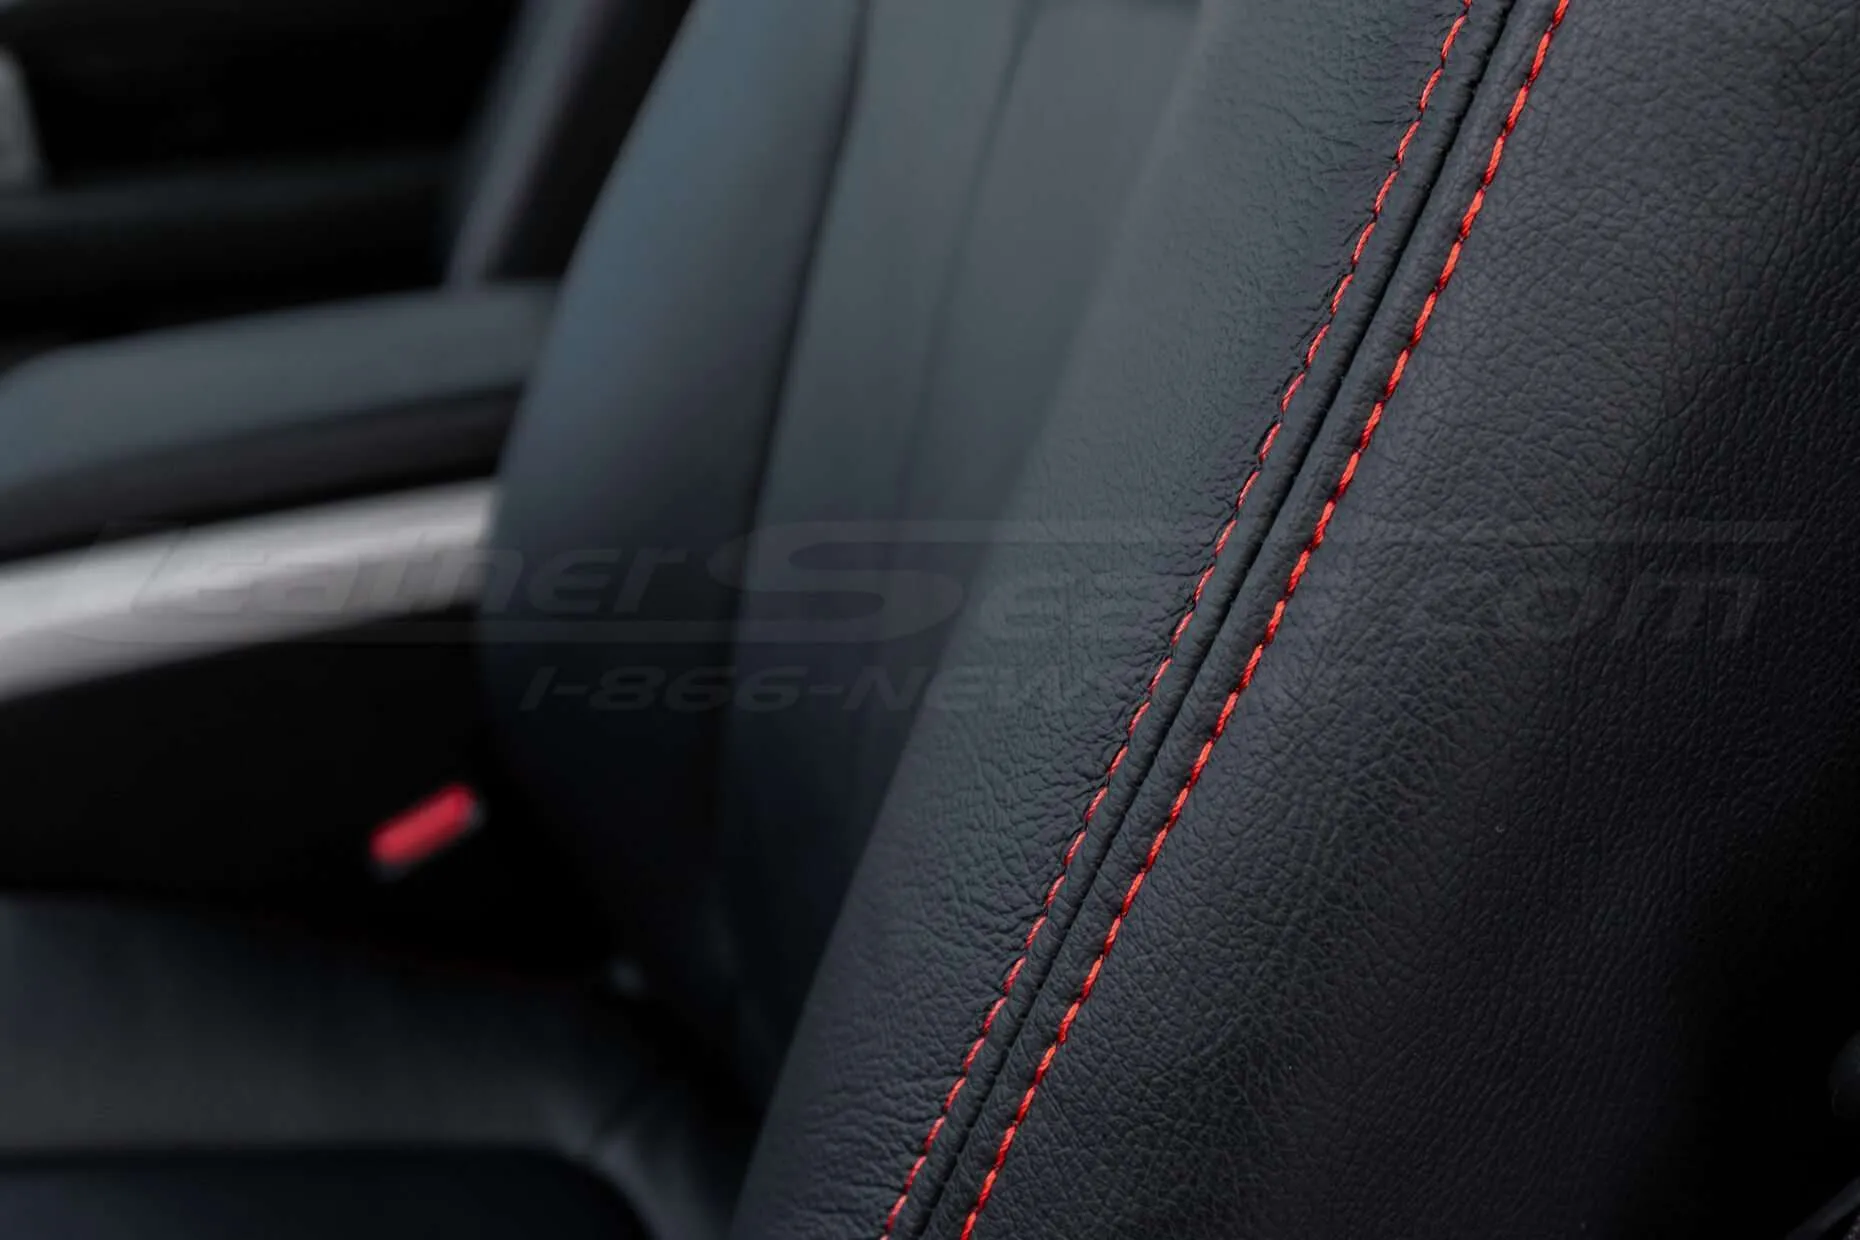 Ford F-150 Leather Seats - Black - Red side stitching